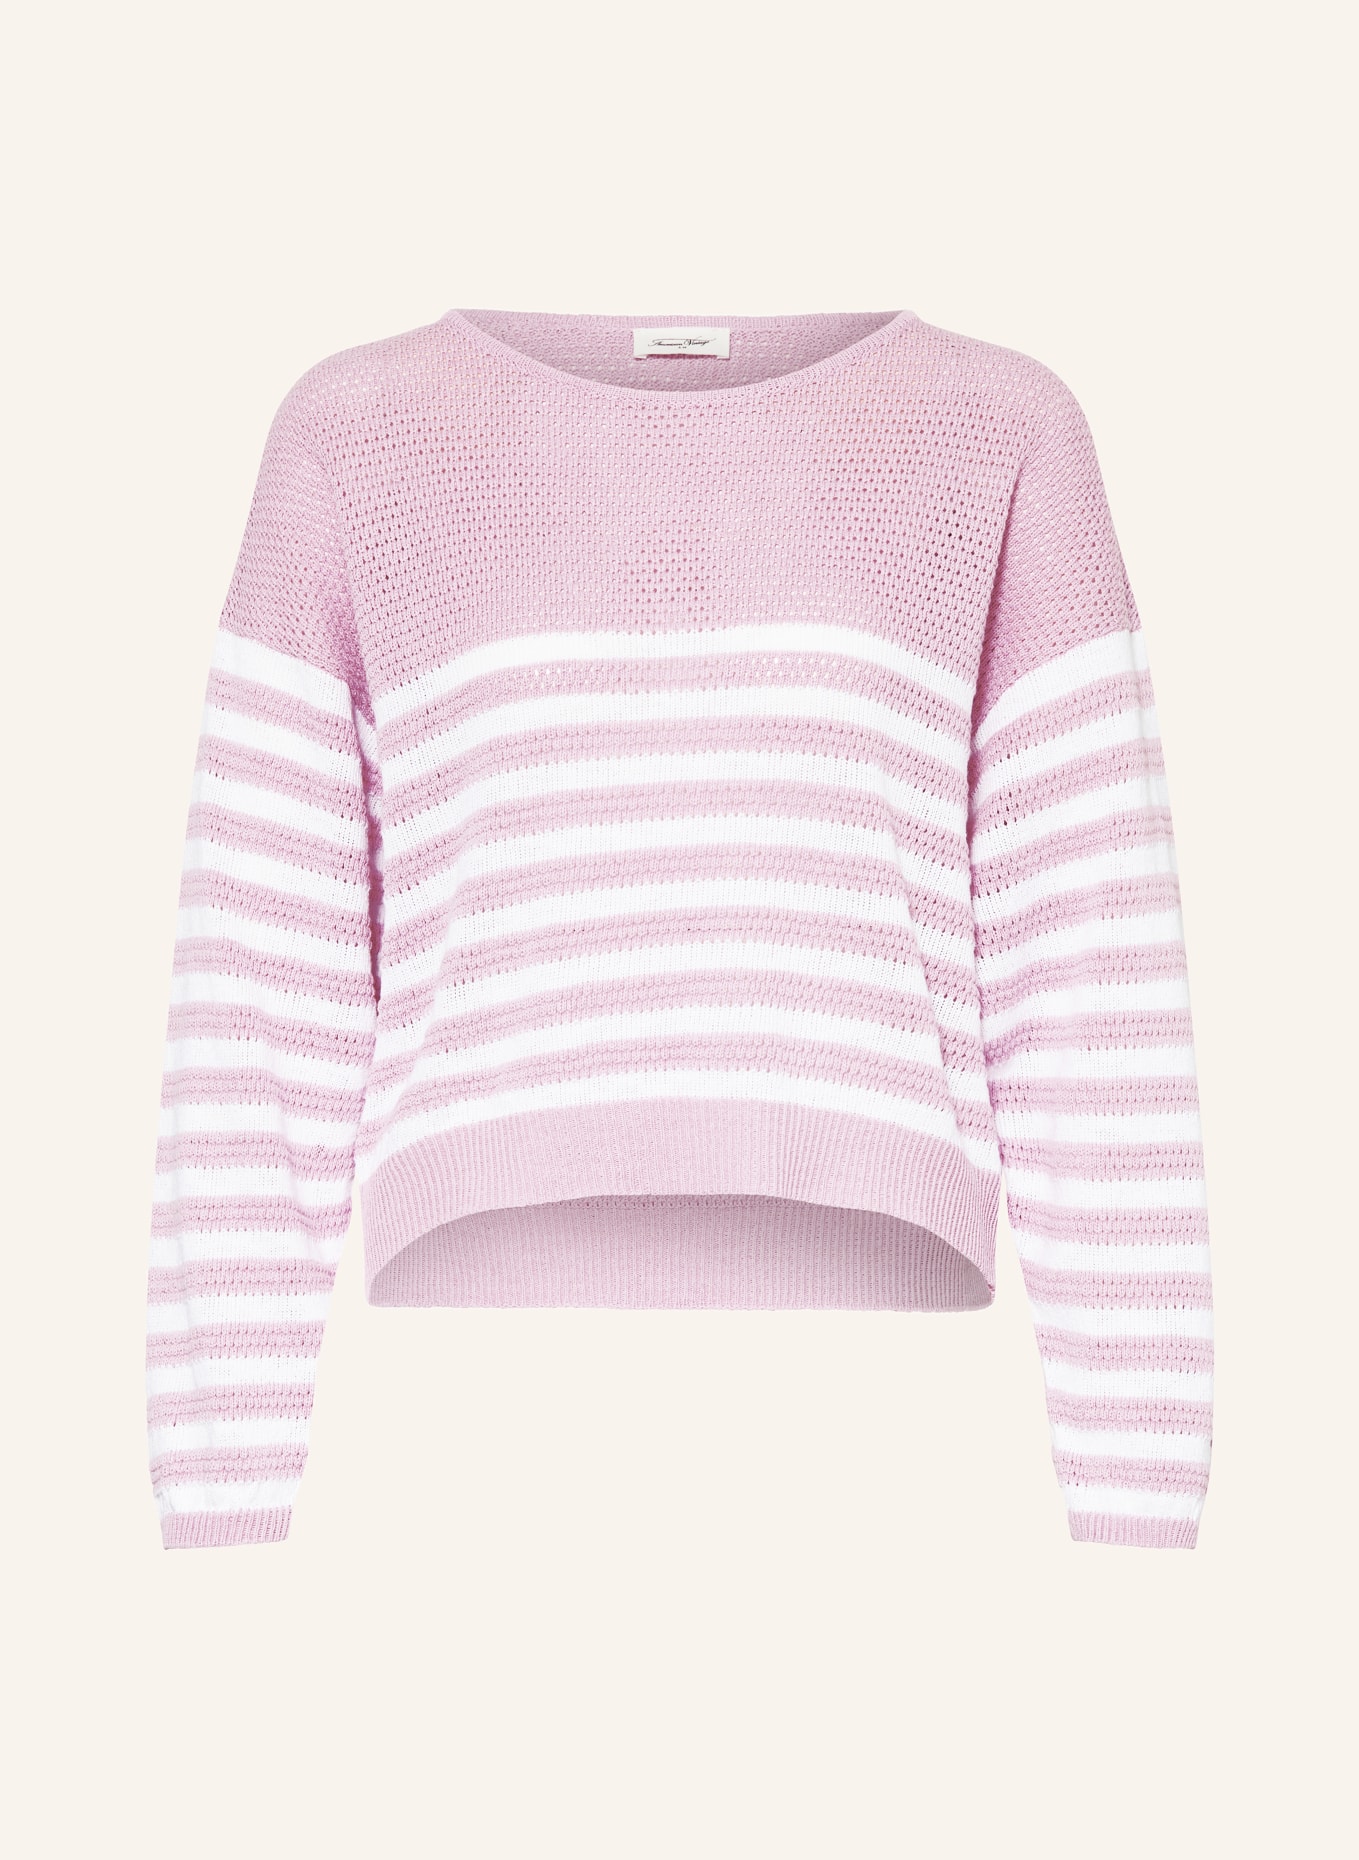 American Vintage Pullover NYAMA, Farbe: ROSA/ WEISS (Bild 1)